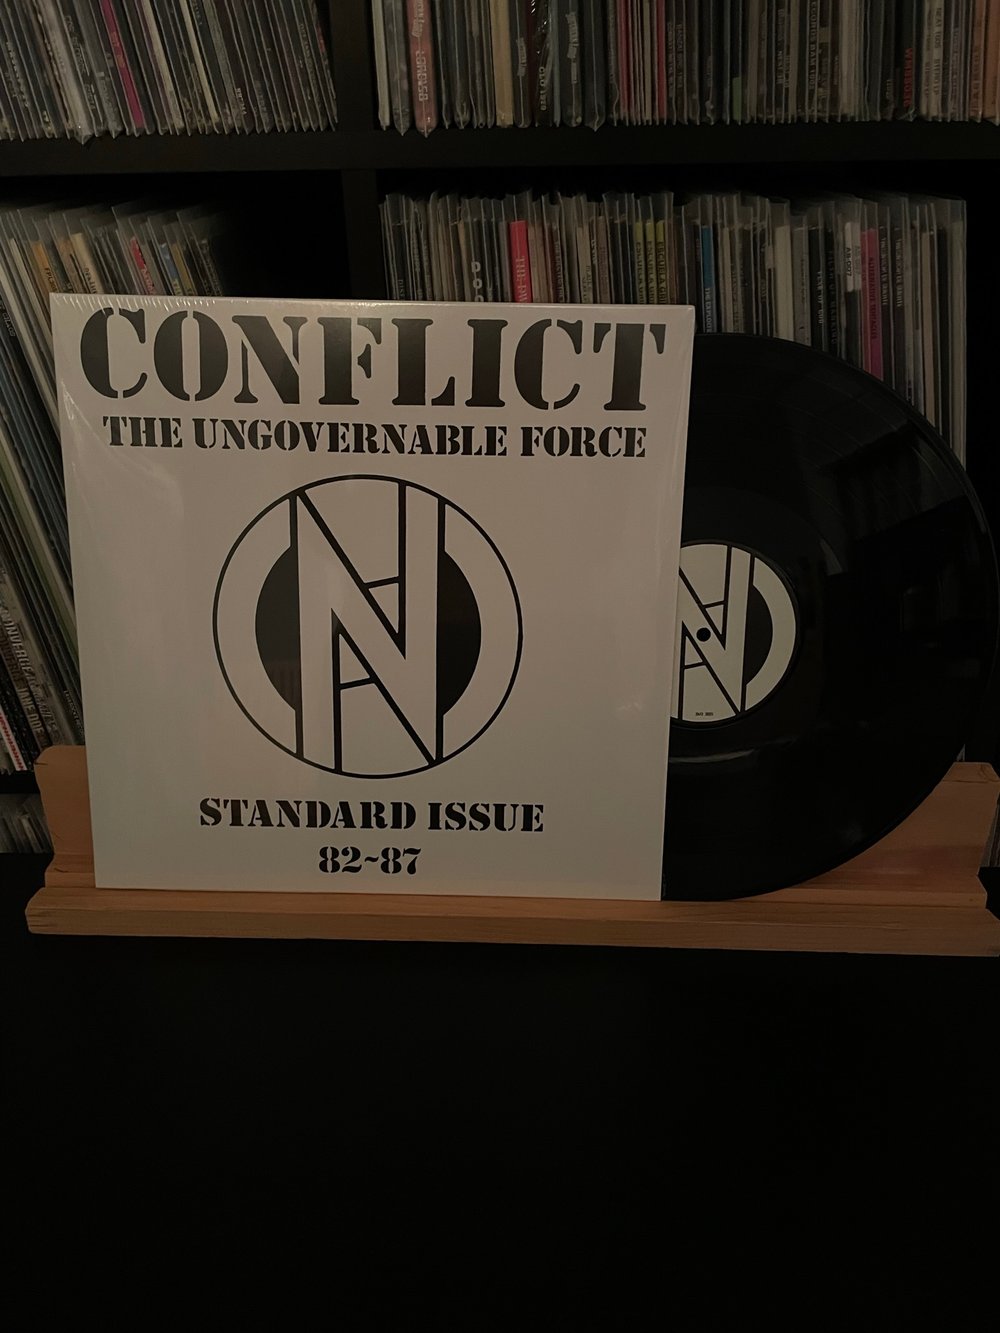 CONFLICT "Standard Issue 82-87" LP